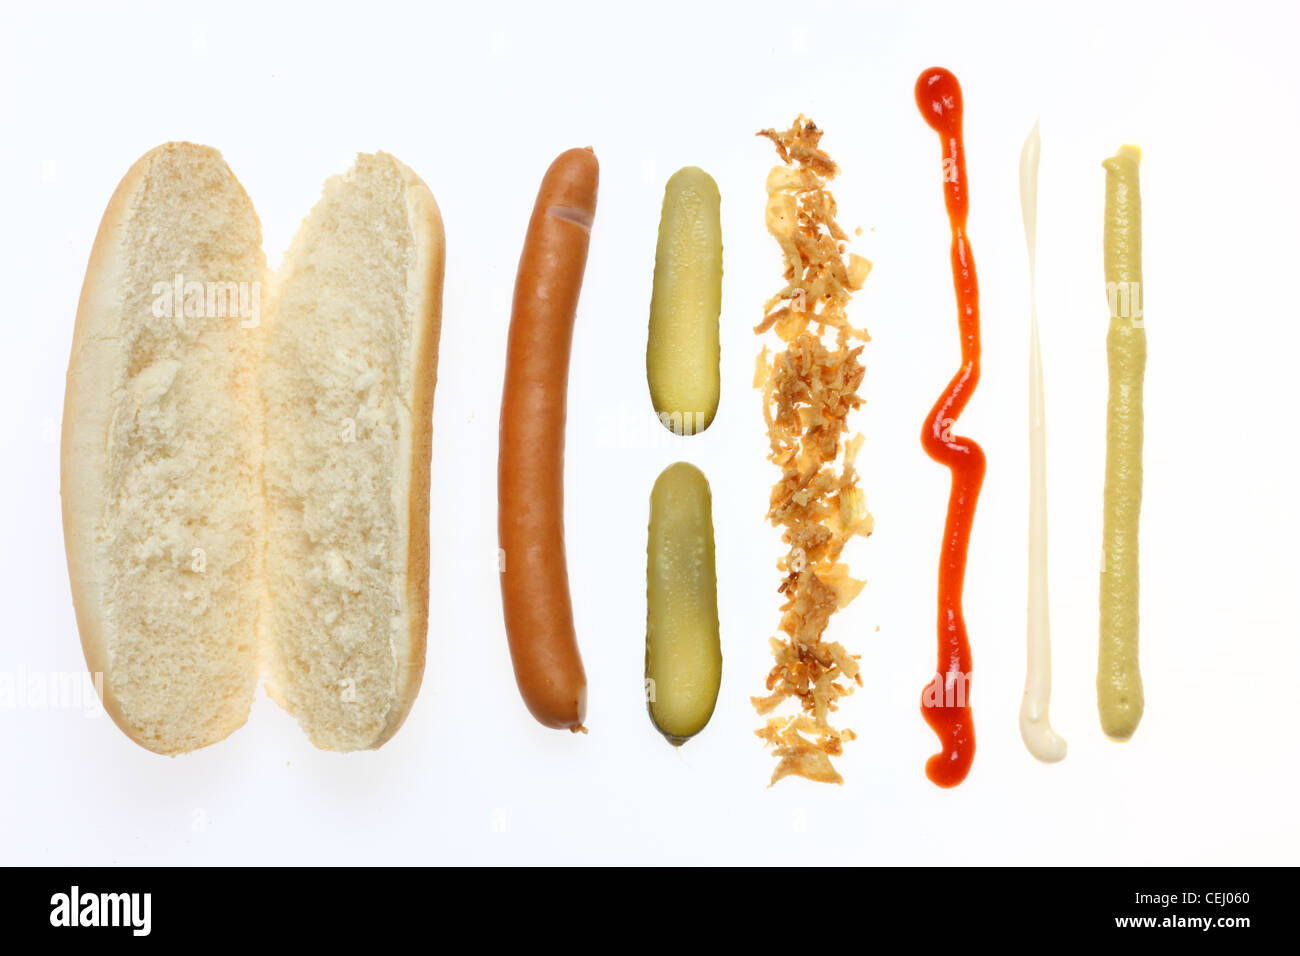 Fast food, nutrition. ingredients of a hot dog. Stock Photo